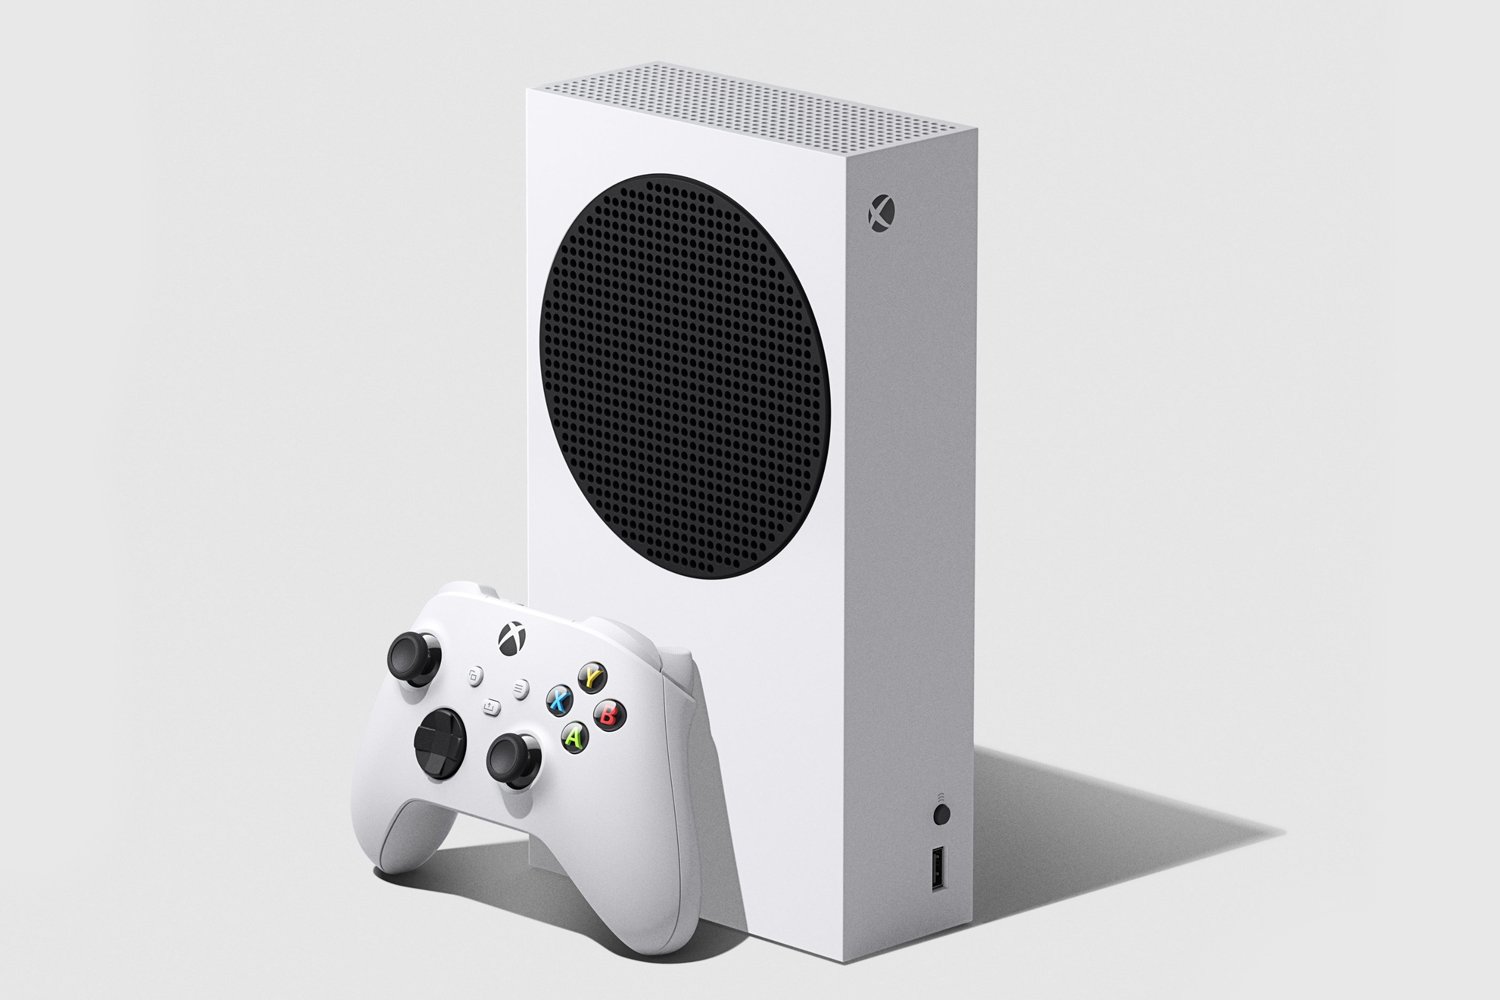 Xbox Series X: A Closer Look at the Technology Powering the Next